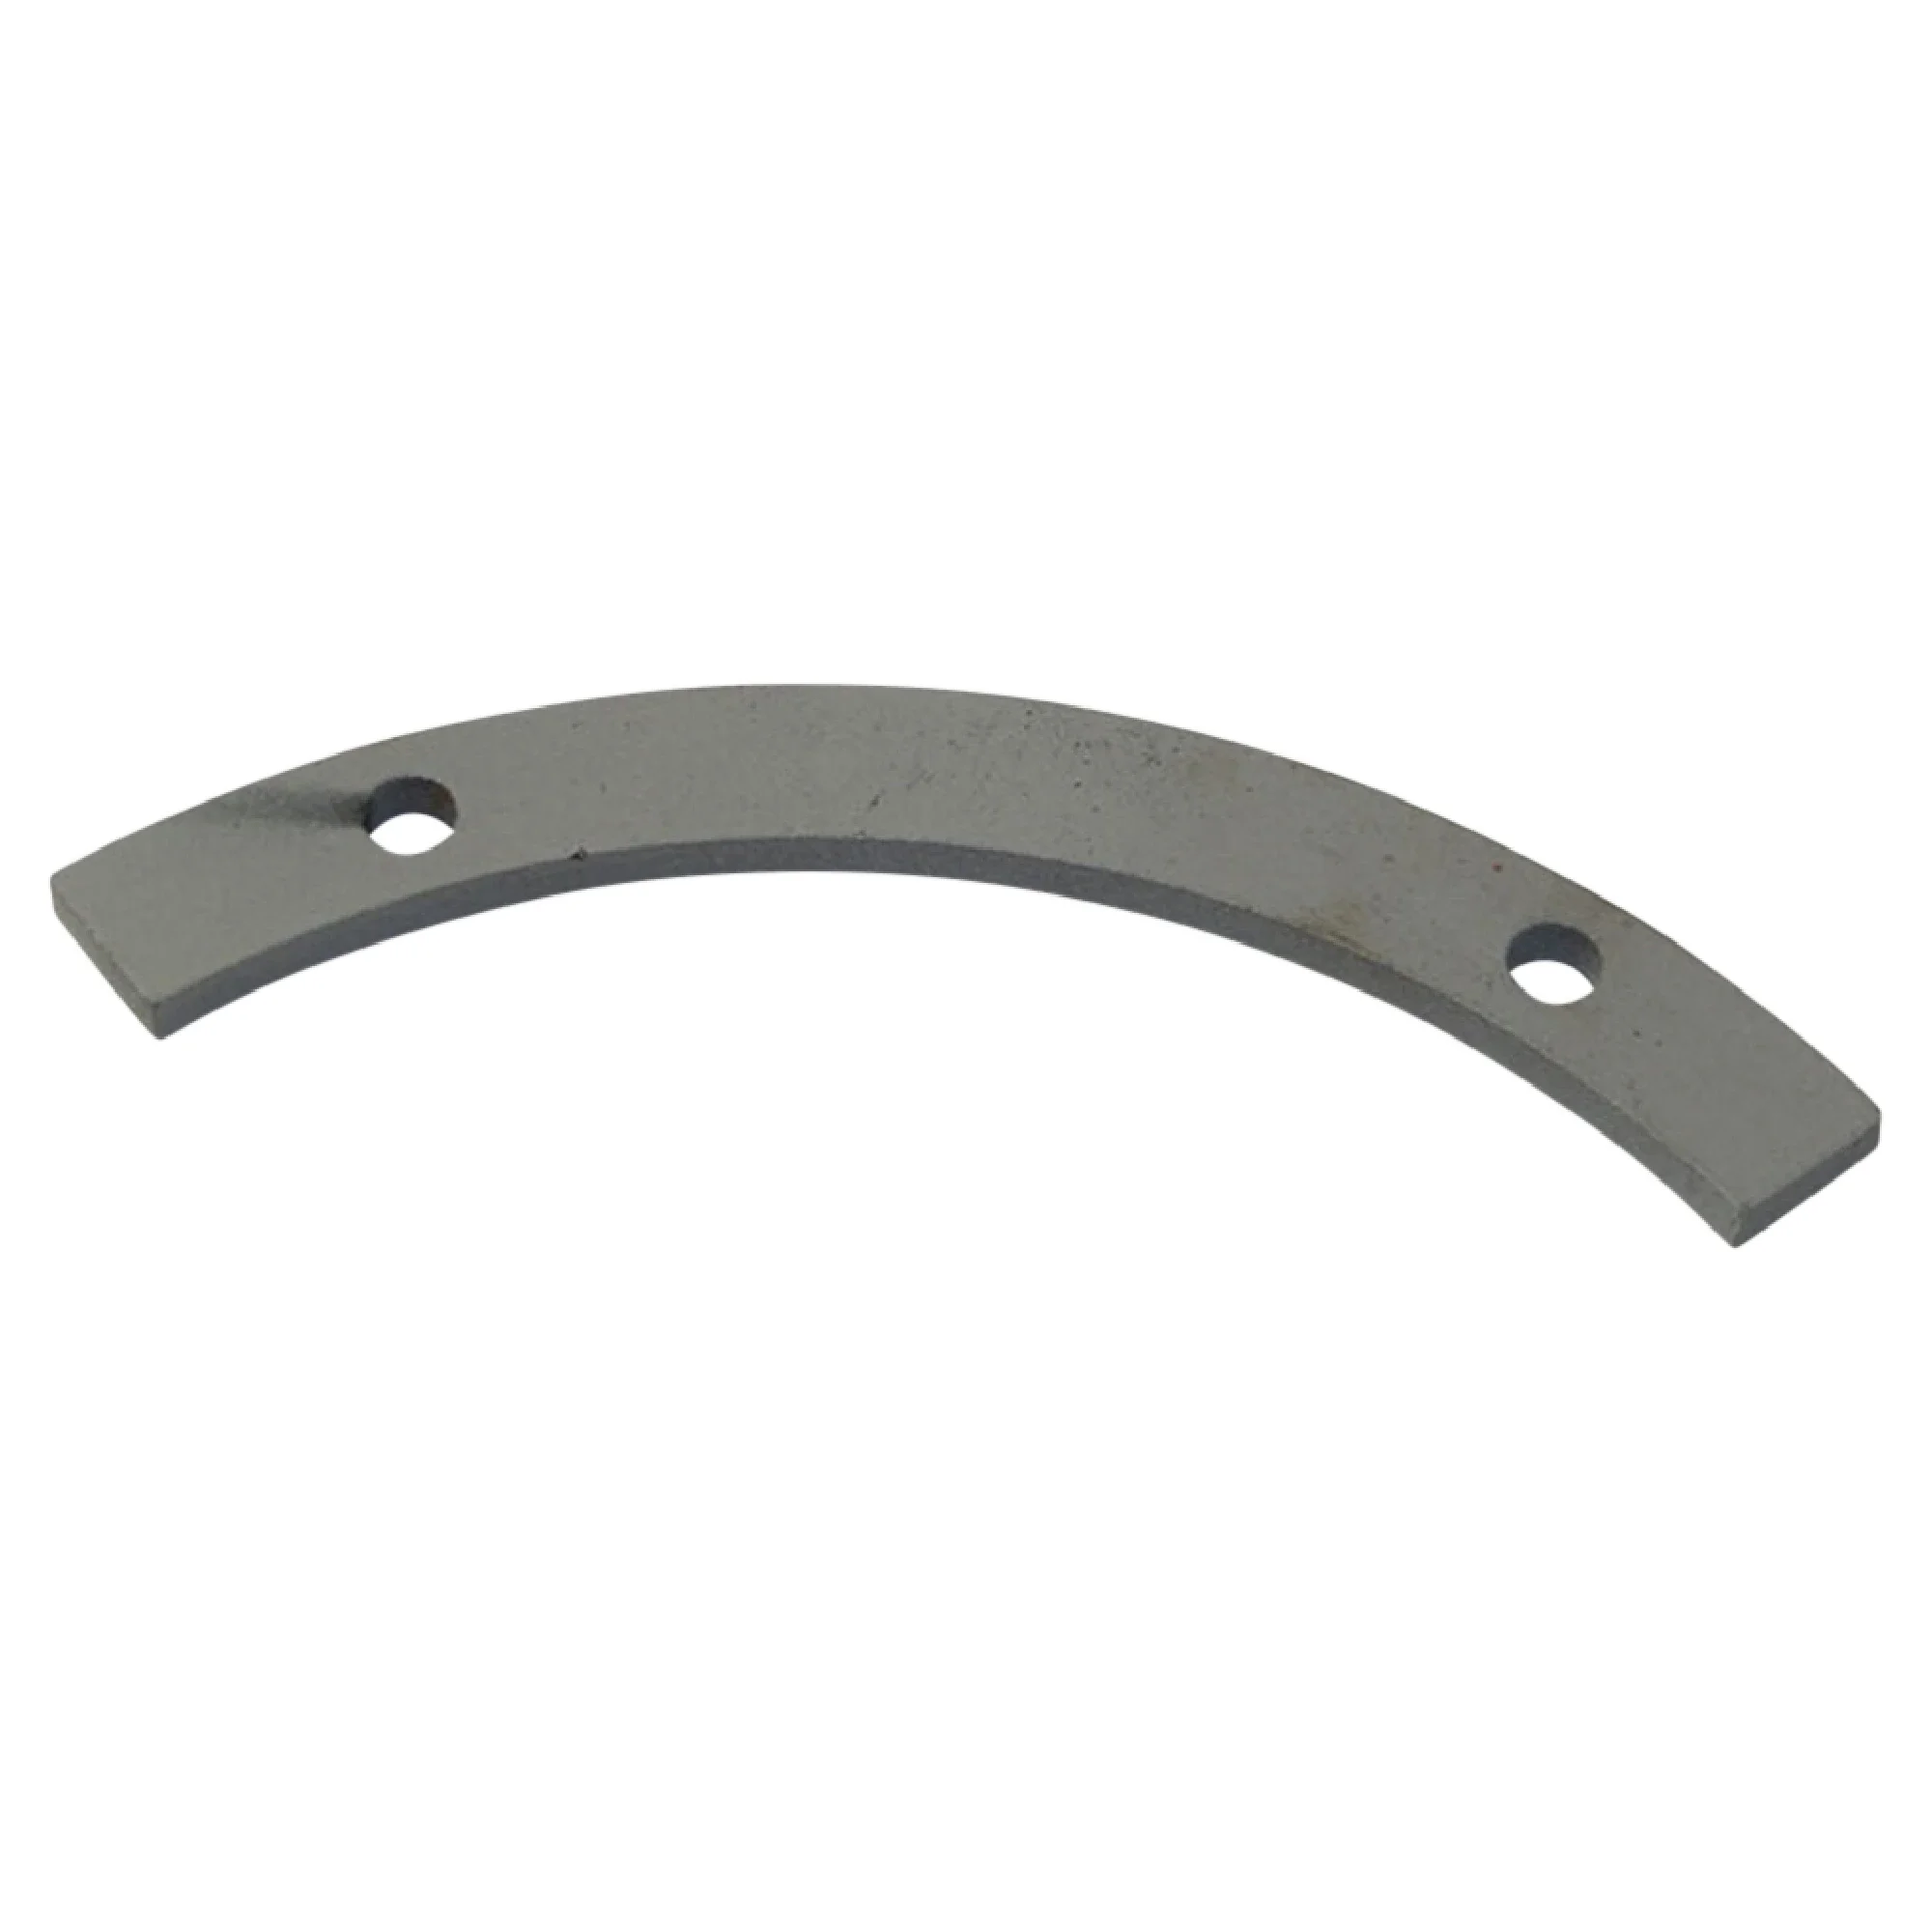 Wastebuilt® Replacement for McNeilus Strip Corner Tailgate Seal